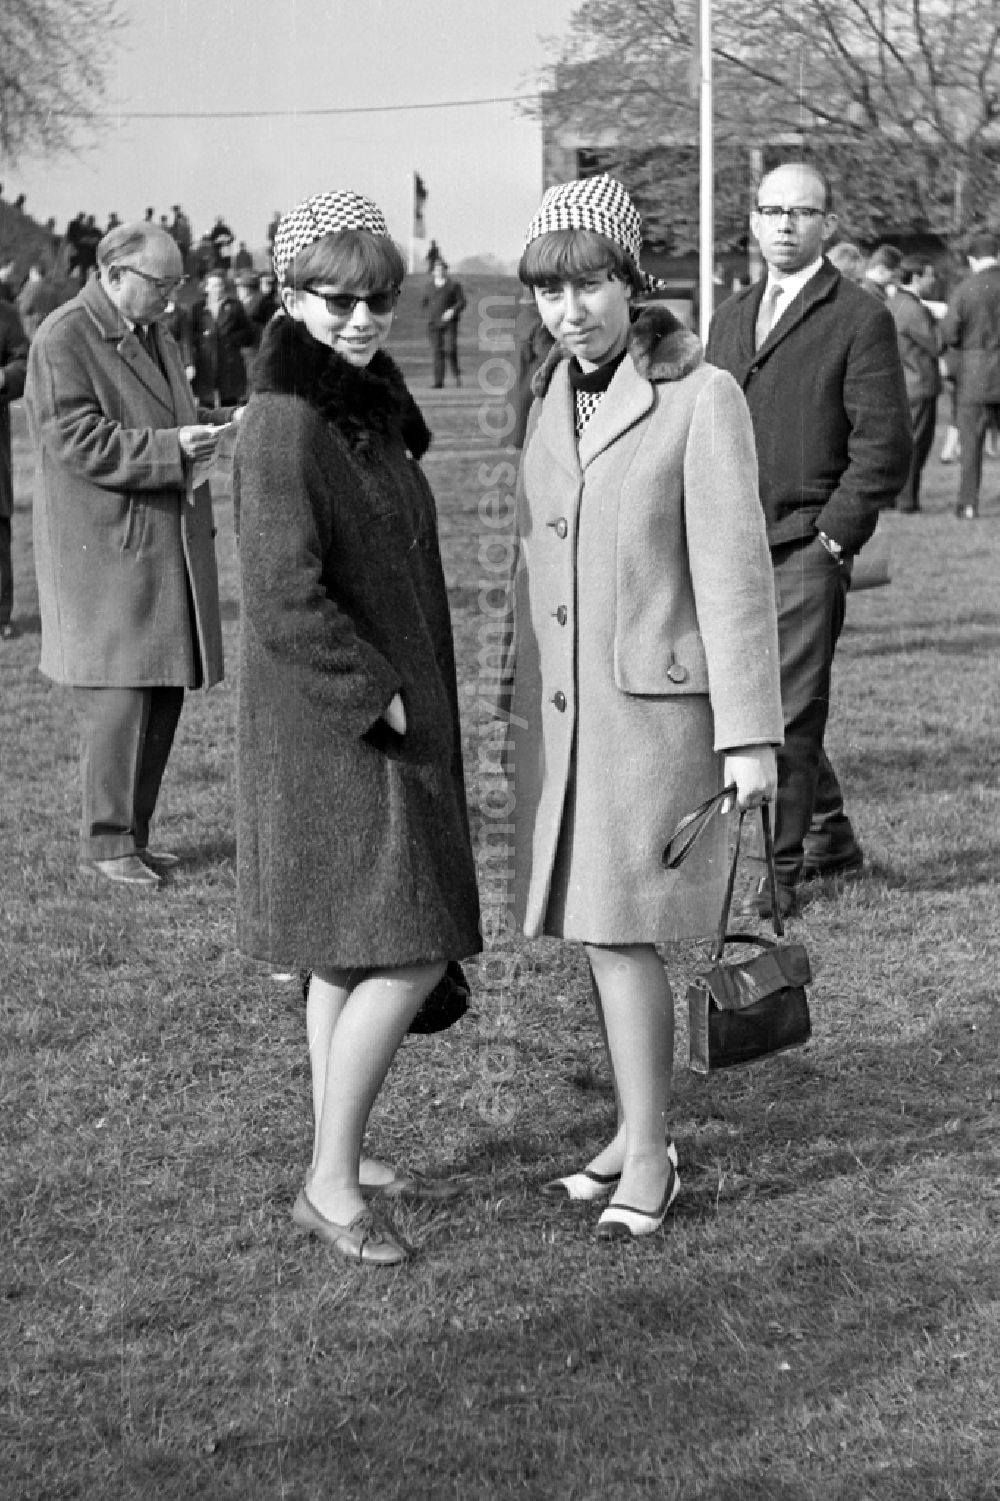 GDR photo archive: Magdeburg - Elegantly dressed women at the Fashion Day at the Herrenkrug racecourse in Magdeburg in the state Saxony-Anhalt on the territory of the former GDR, German Democratic Republic